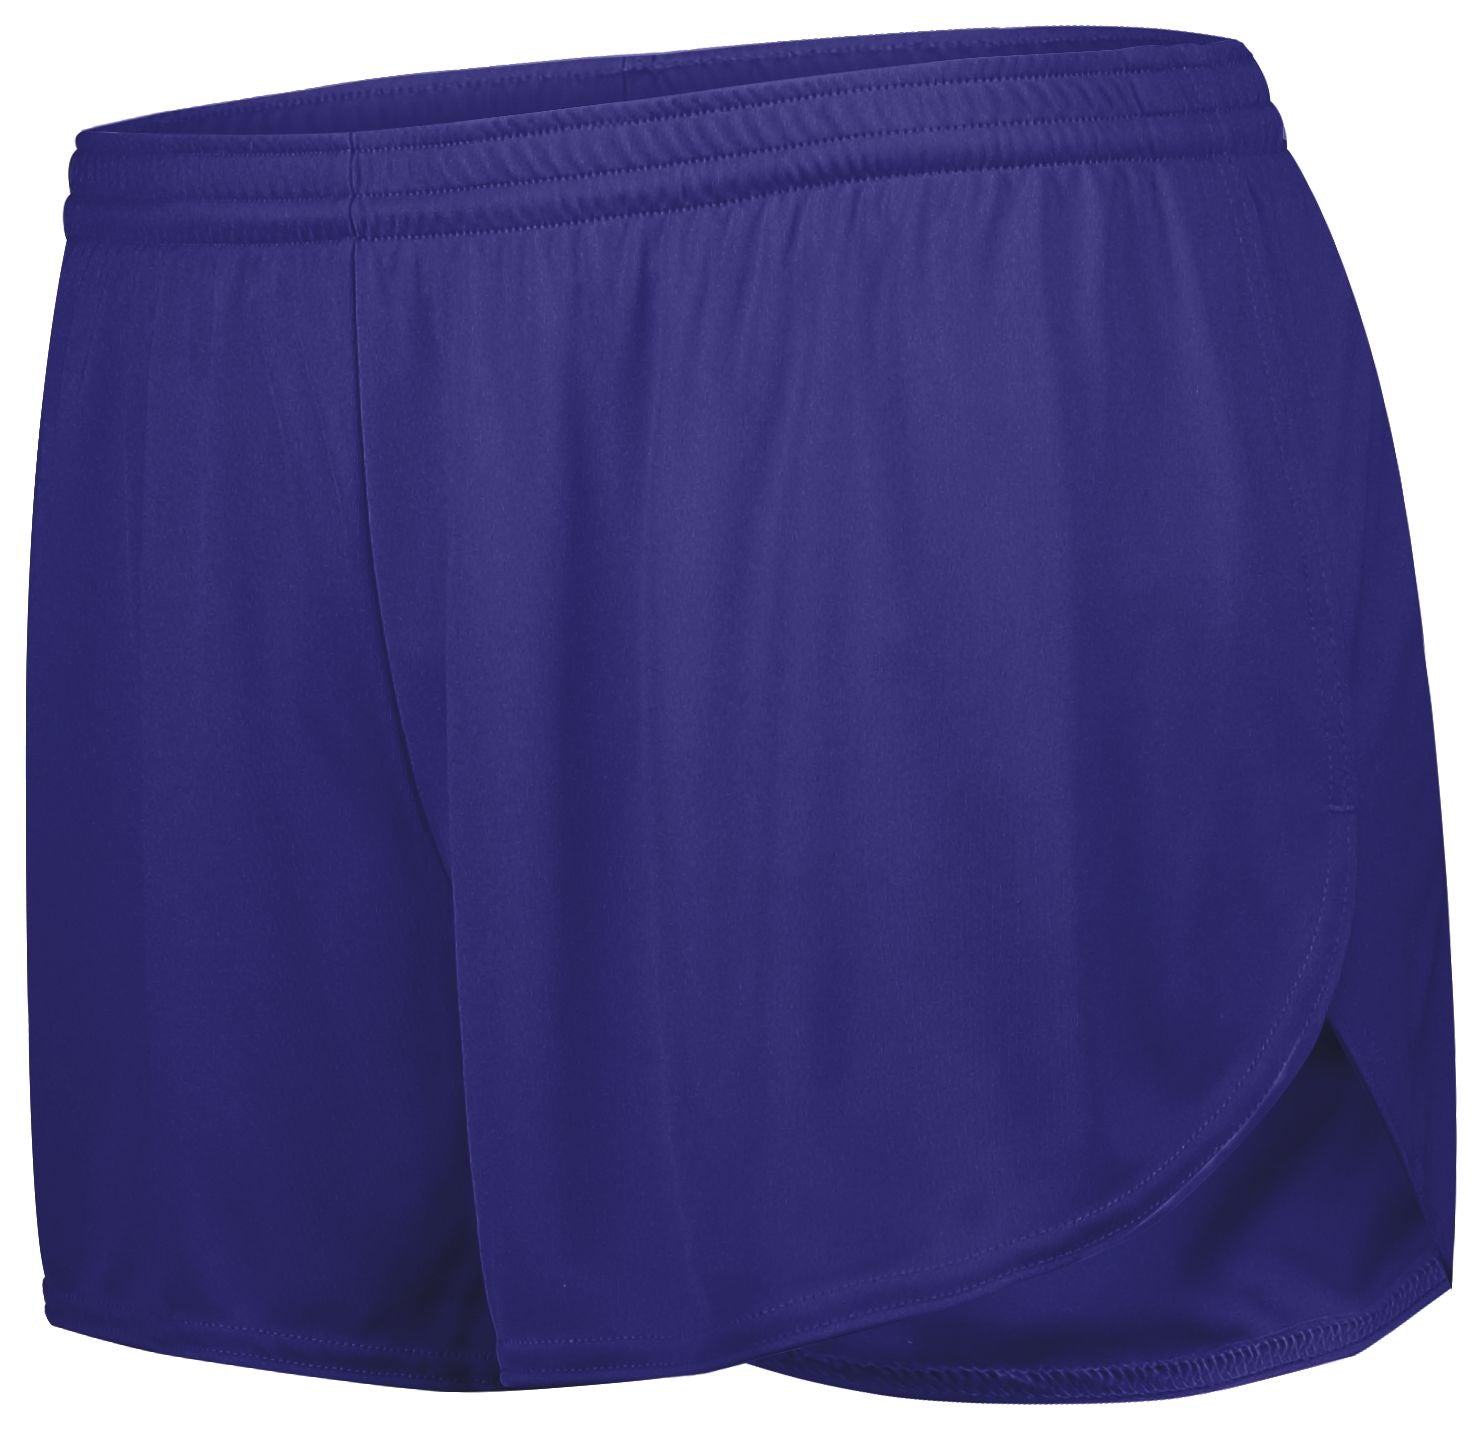 Holloway Ladies Pr Max Track Shorts in Purple (Hlw)  -Part of the Ladies, Ladies-Shorts, Track-Field, Holloway product lines at KanaleyCreations.com